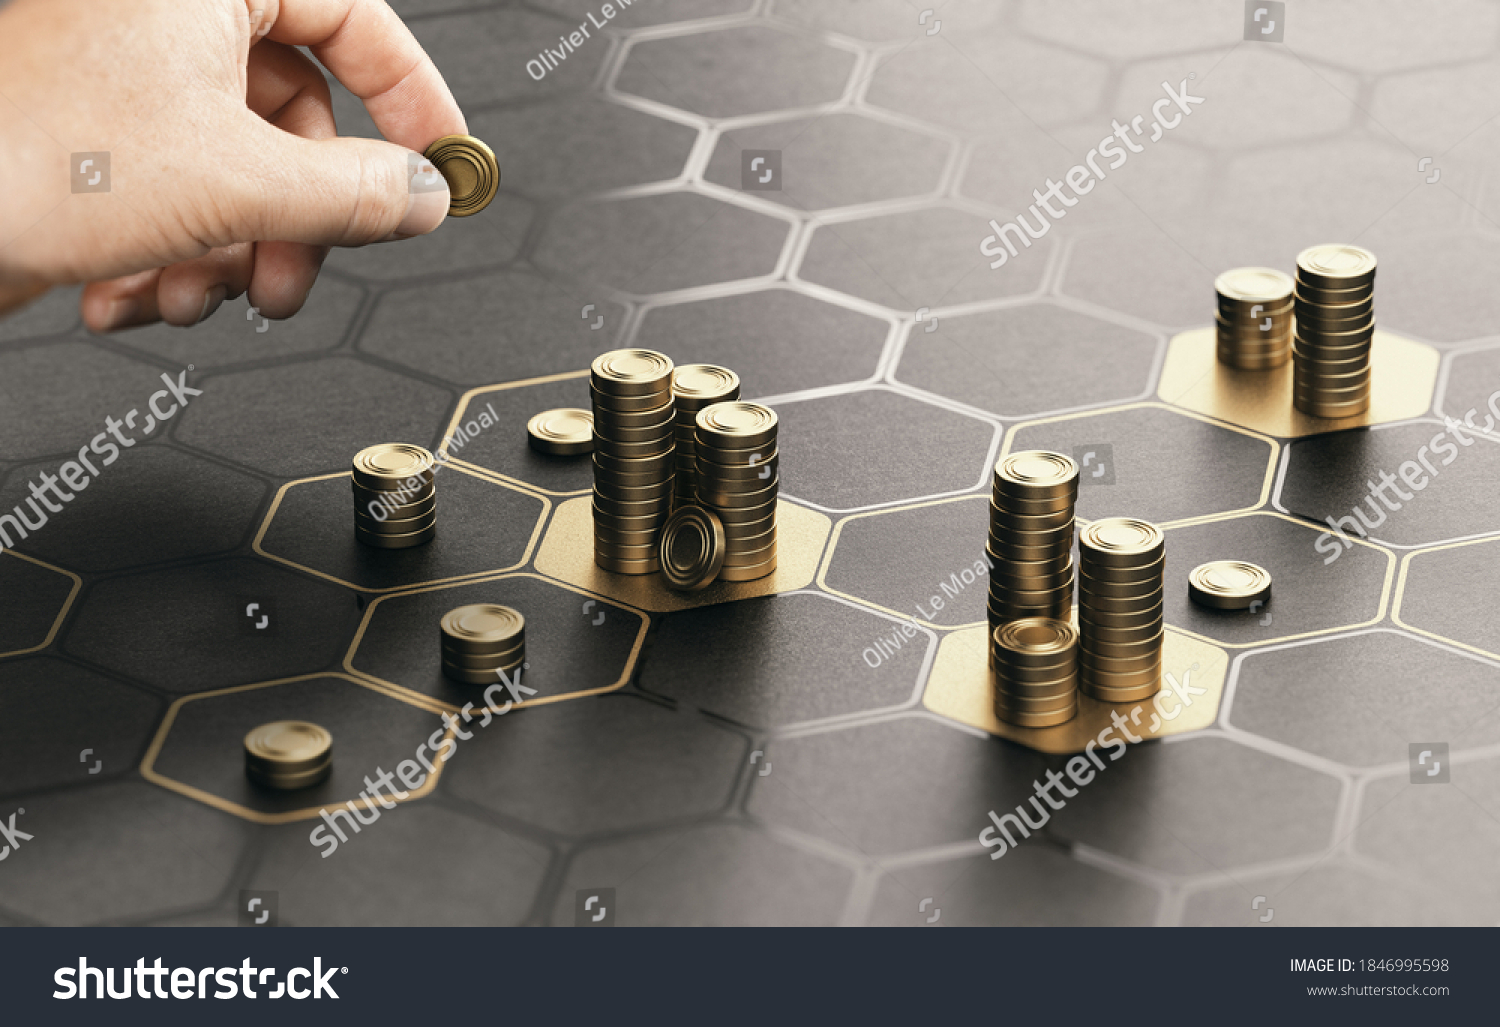 Human hand stacking coins over a black background with hexagonal golden shapes. Concept of investment management and portfolio diversification. Composite image between a hand photography and a 3D back #1846995598